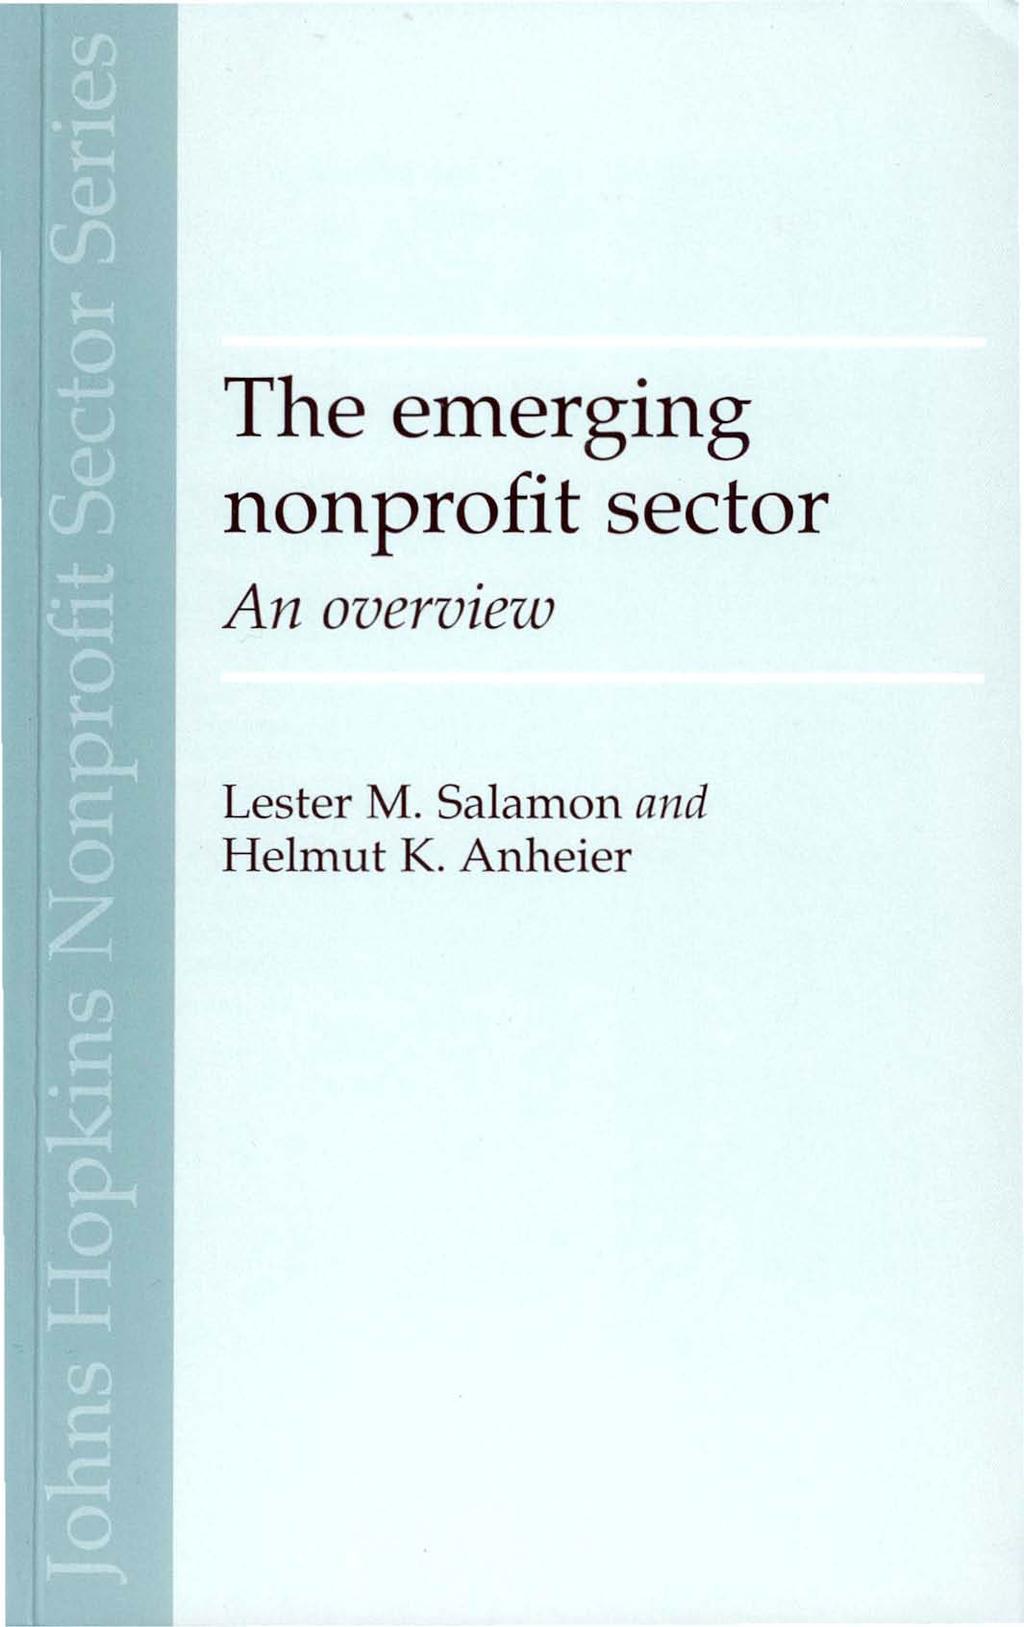 The emerging nonprofit sector An